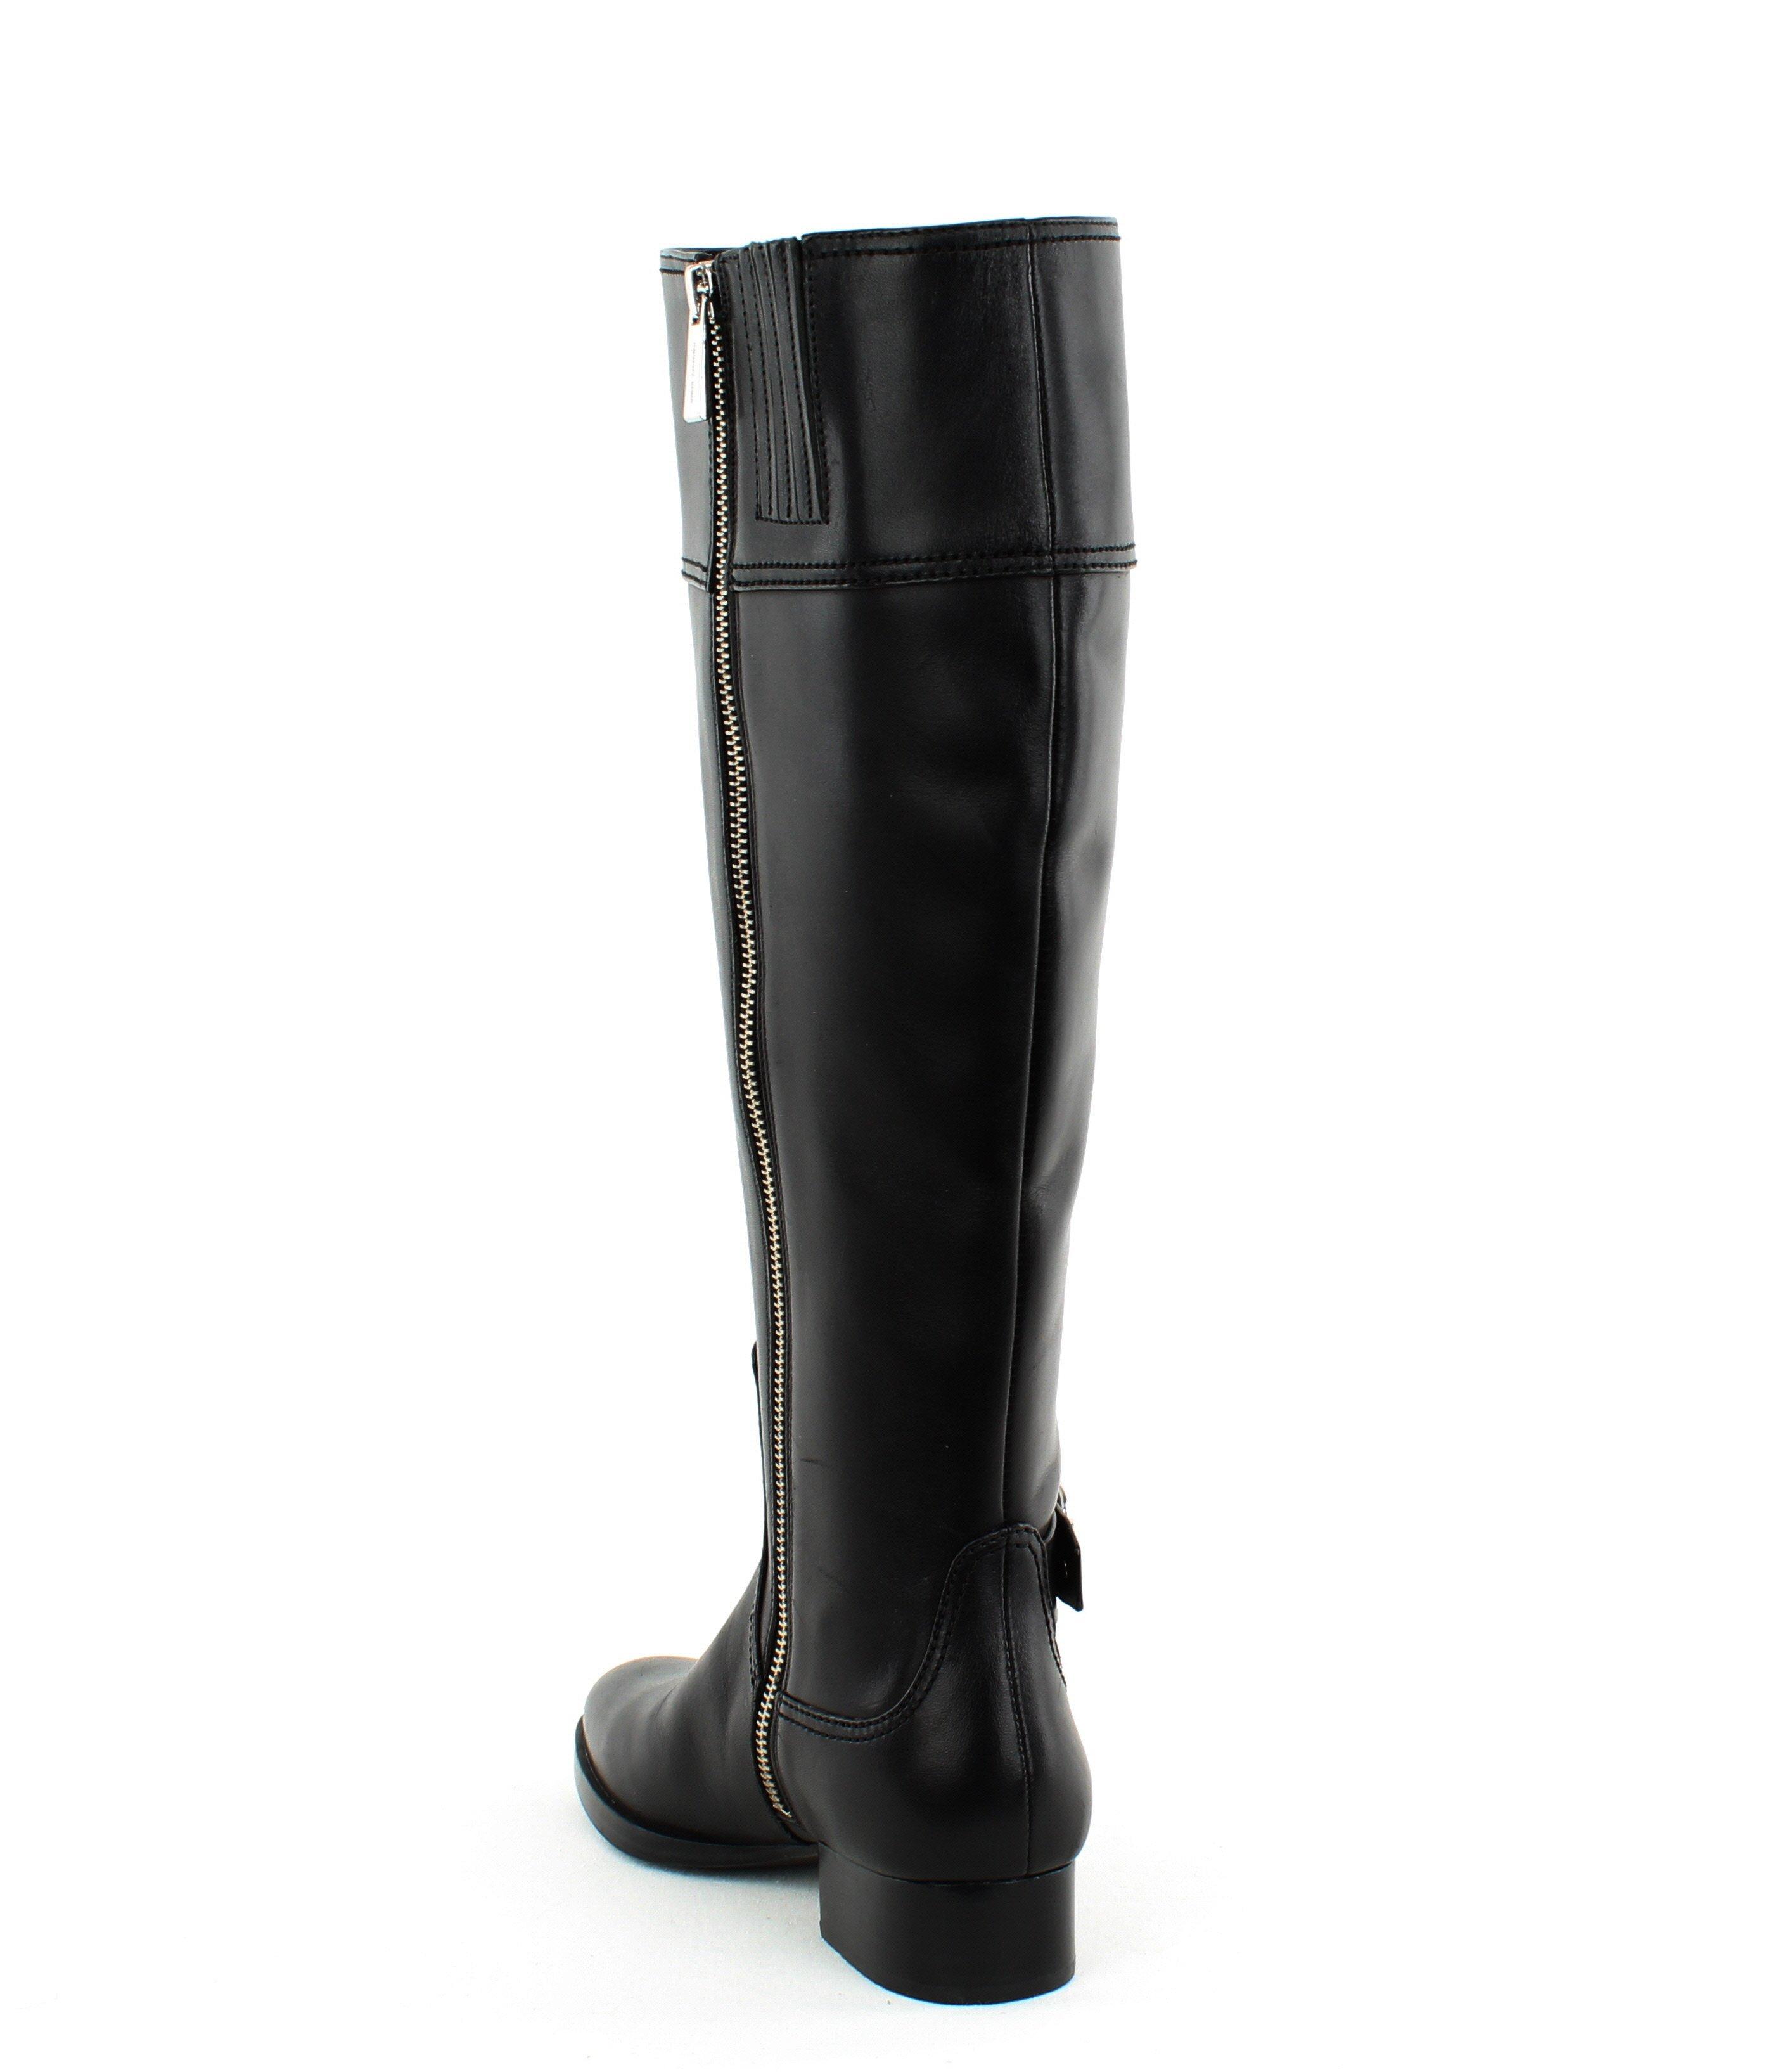 MICHAEL Michael Kors Leather Harland Wide Shaft Riding Boot in Black - Lyst